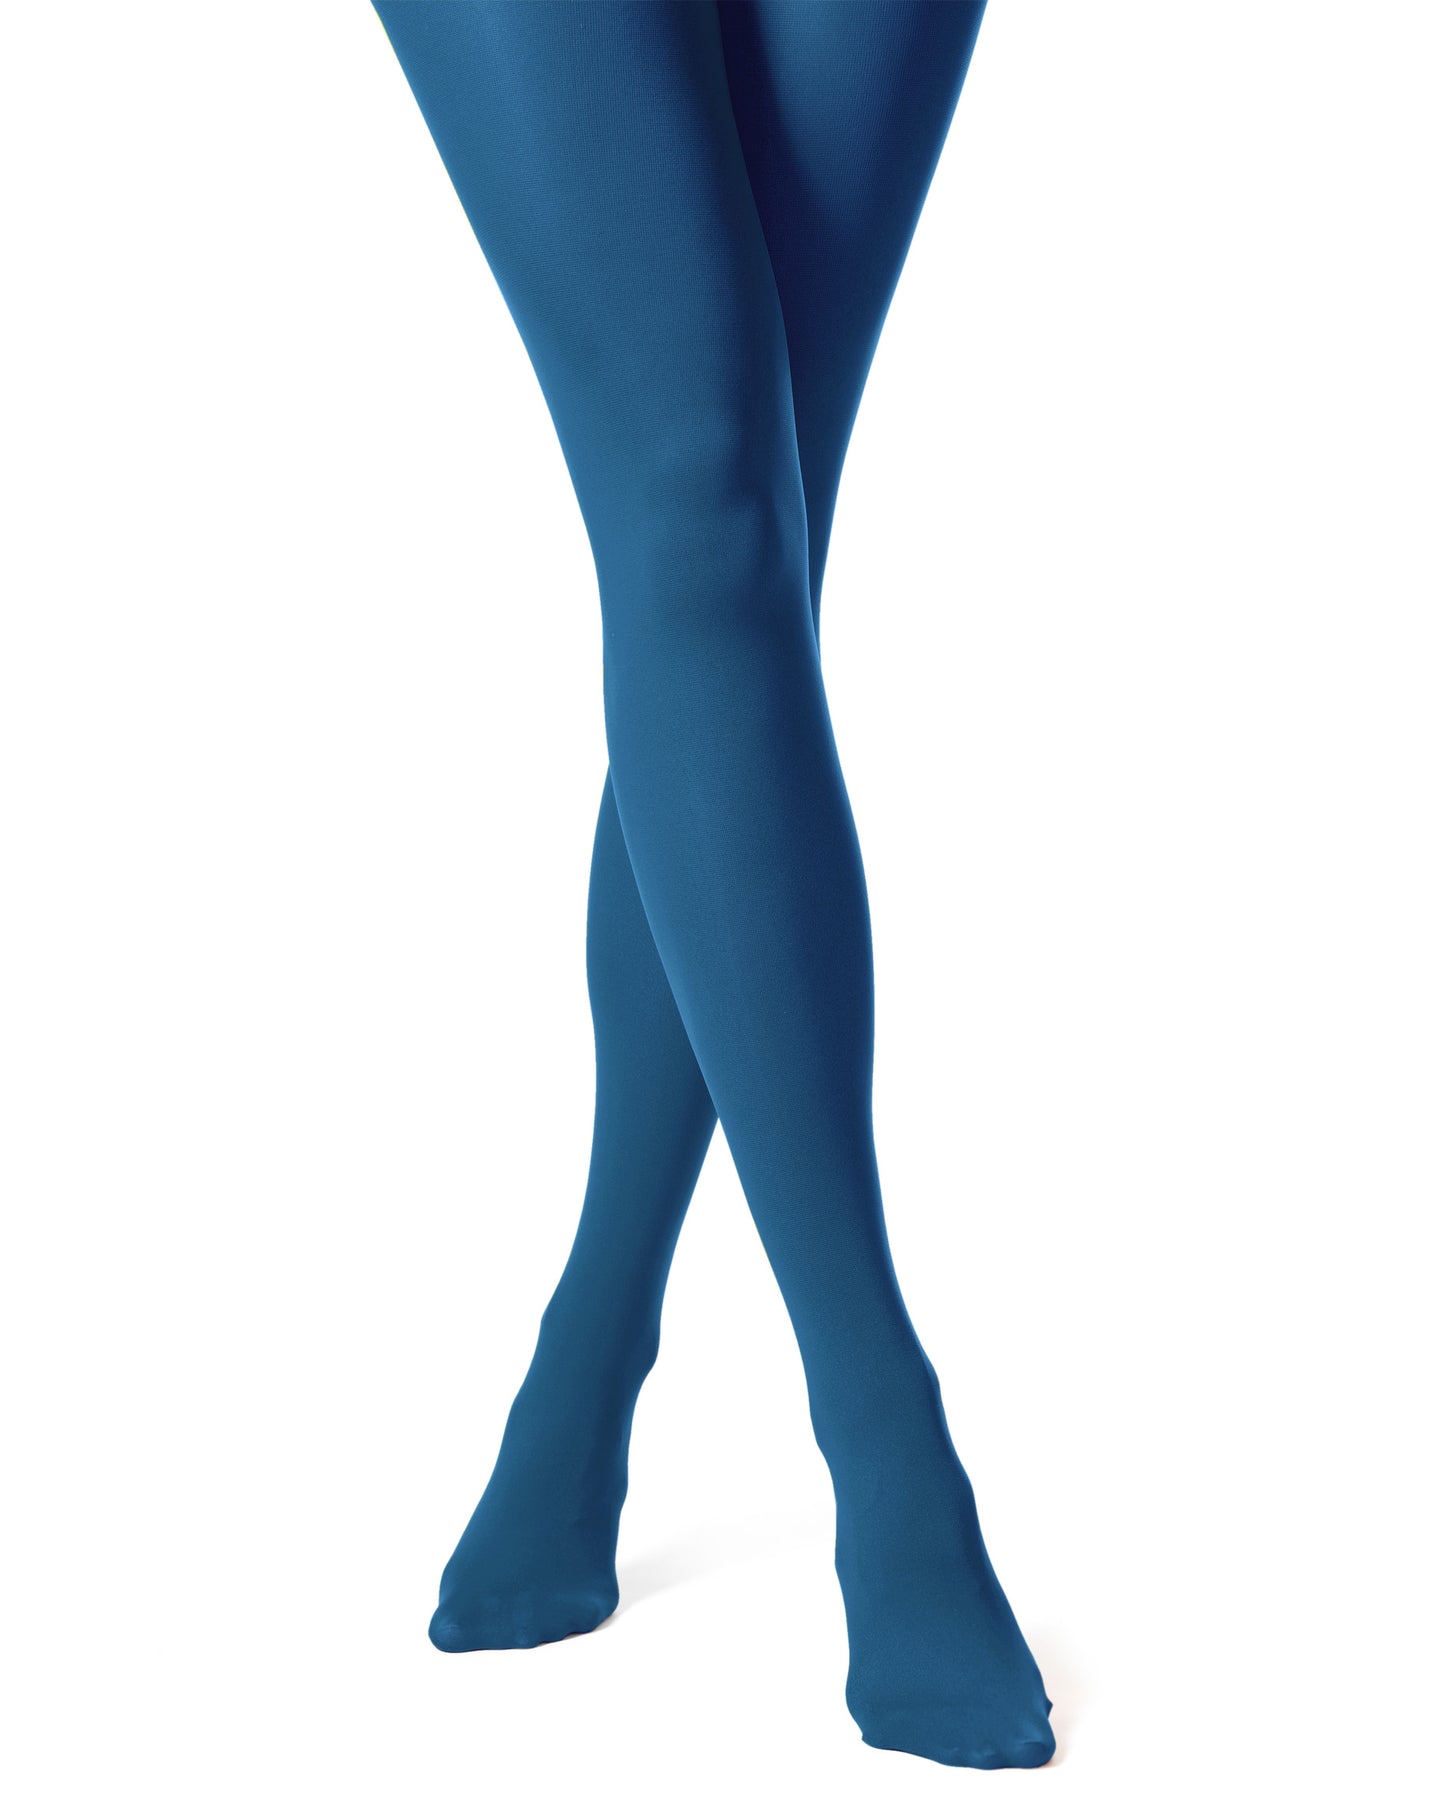 Trasparenze Sophie 70 Collant - coloured opaque tights in teal blue (ottanio)